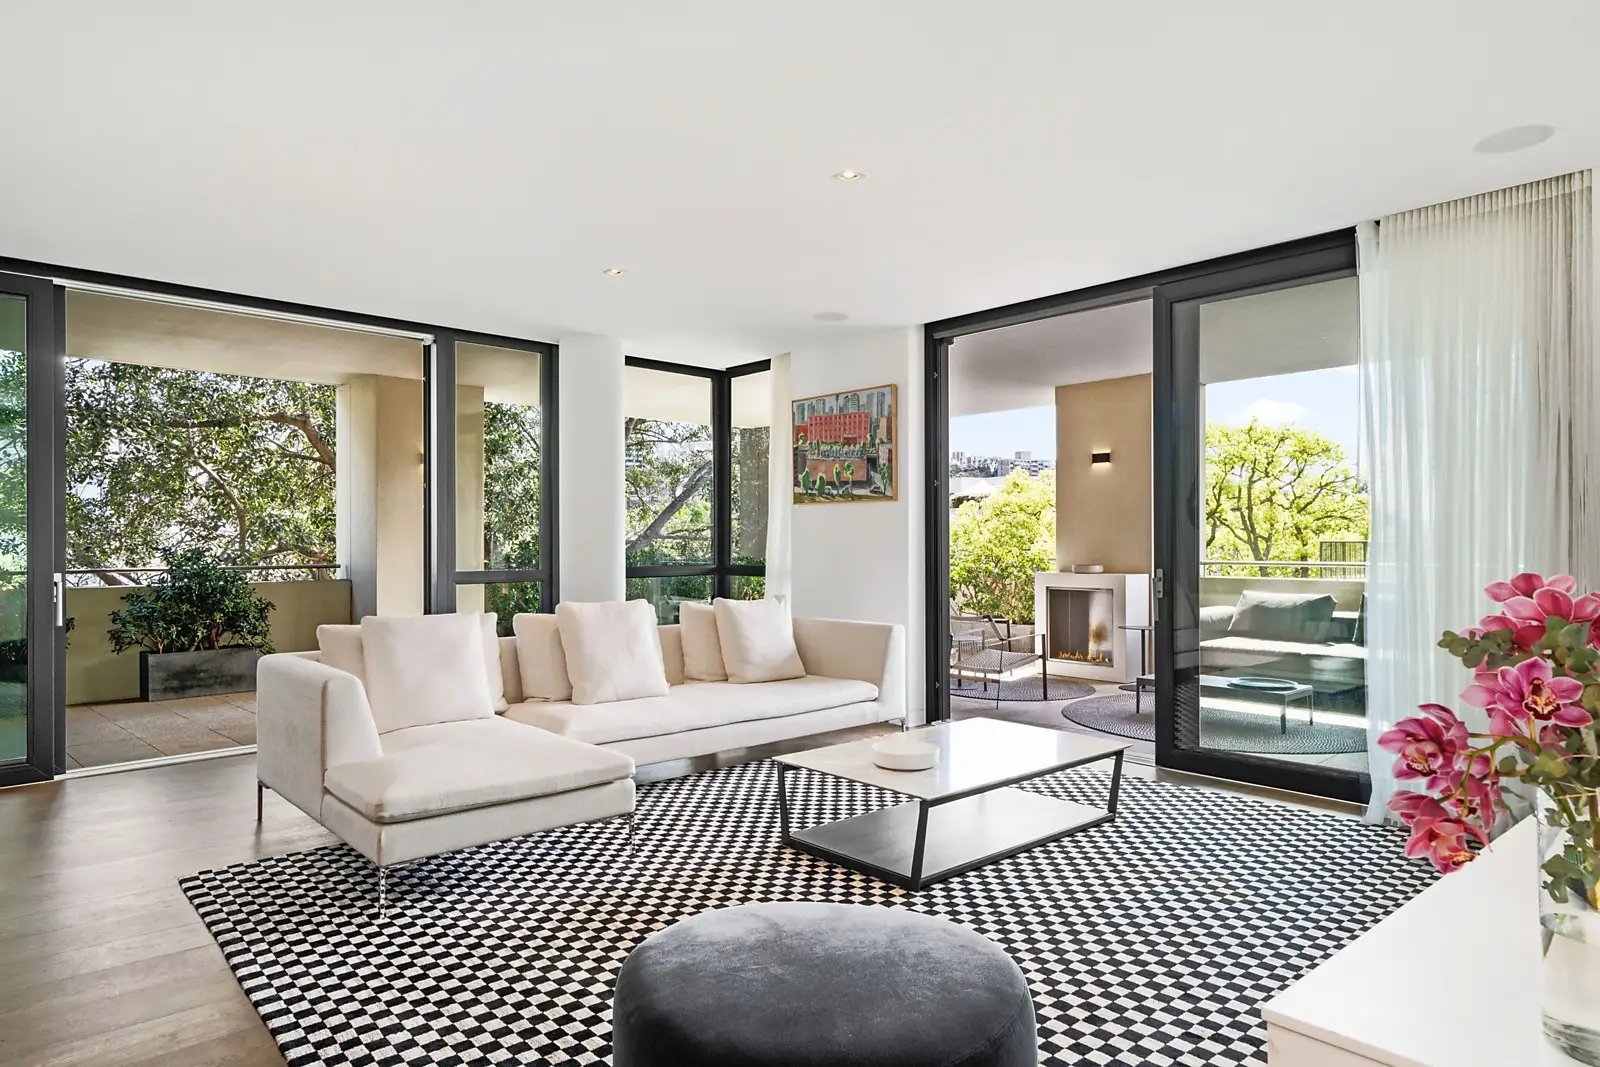 Photo #1: 5B/22 Knox Street, Double Bay - Sold by Sydney Sotheby's International Realty